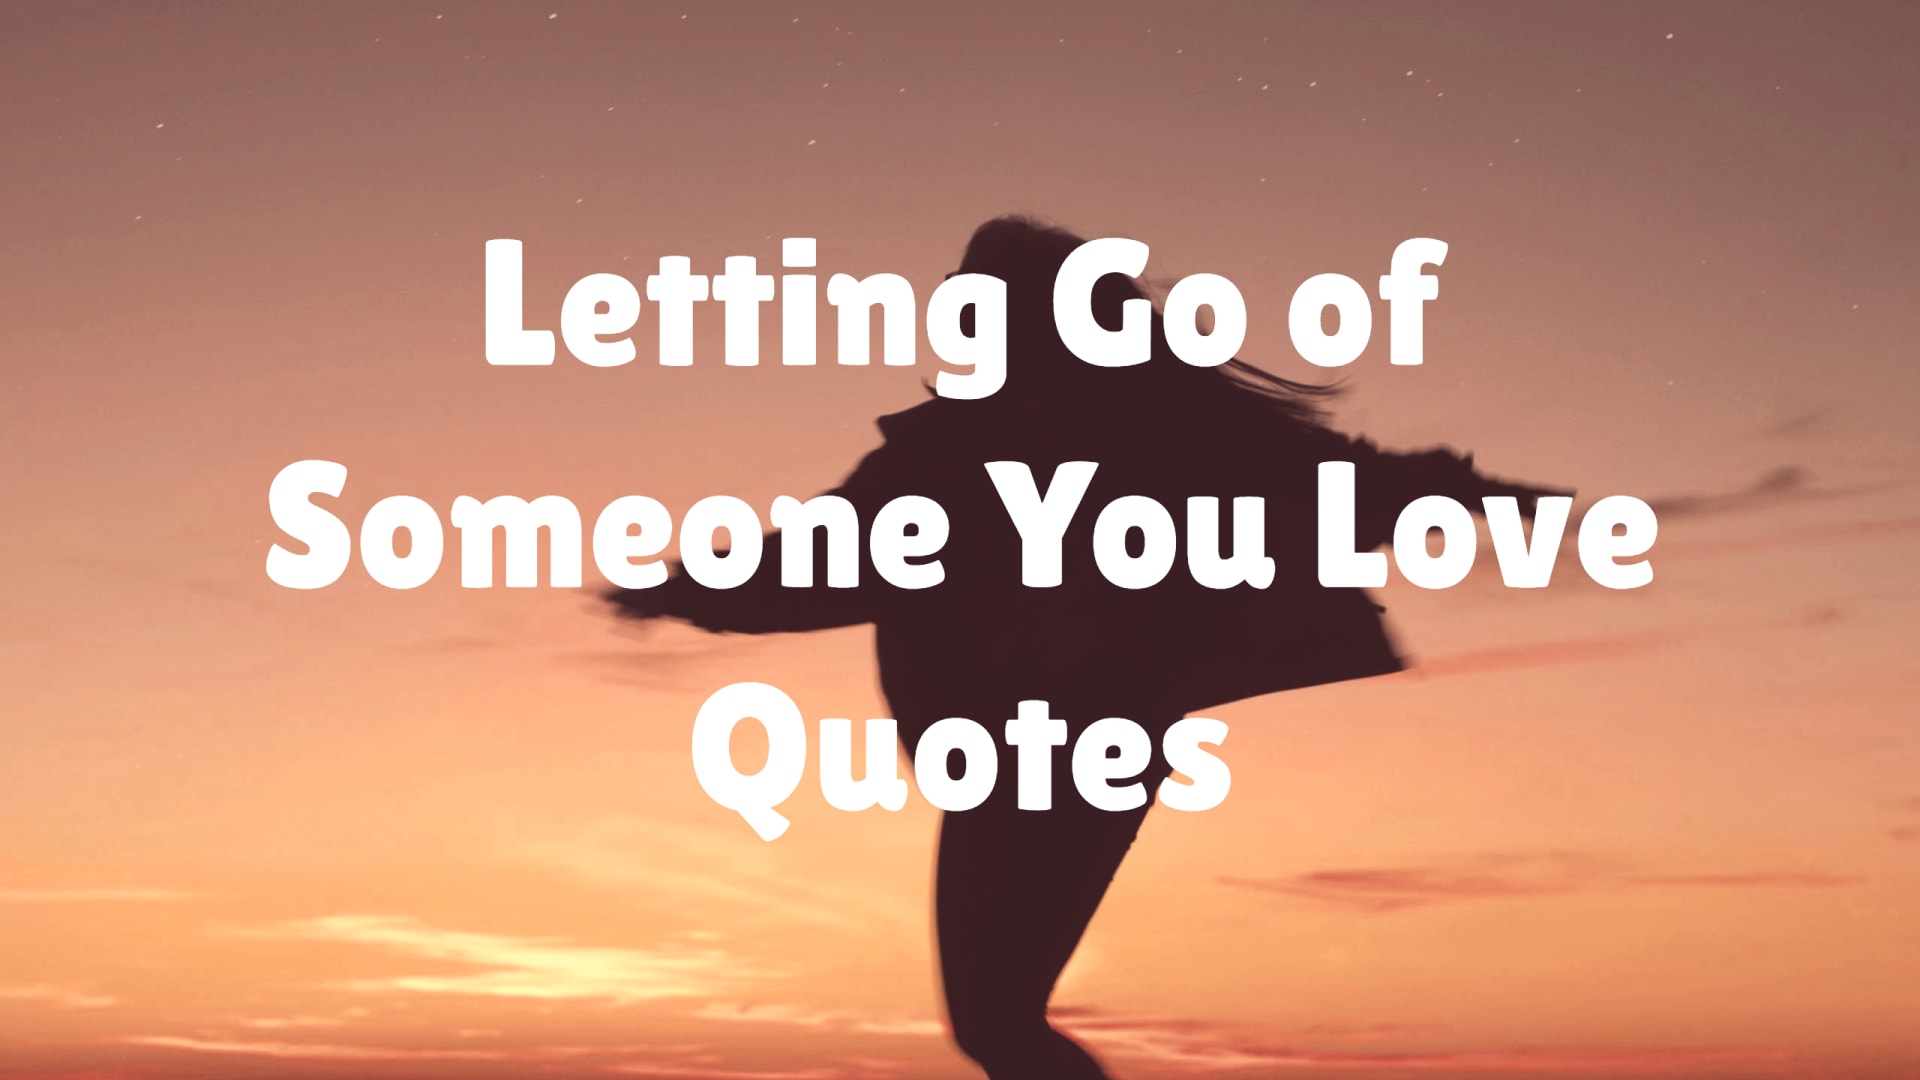 When to let go of love